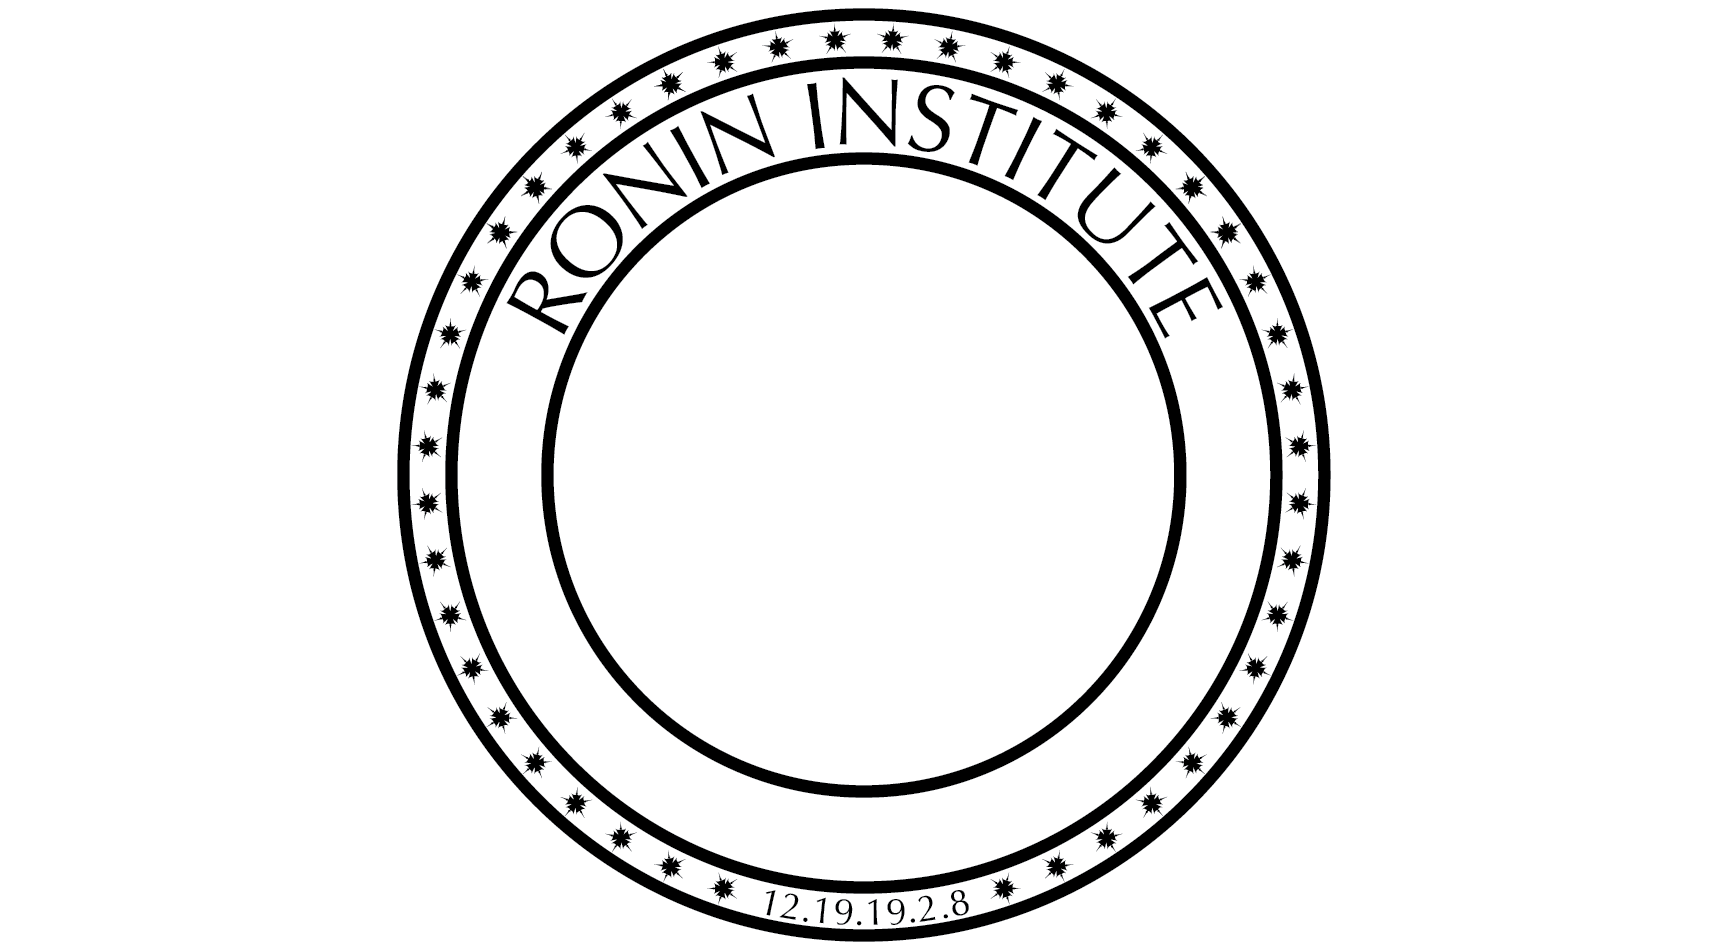 The Ronin Institute for Independent Scholarship